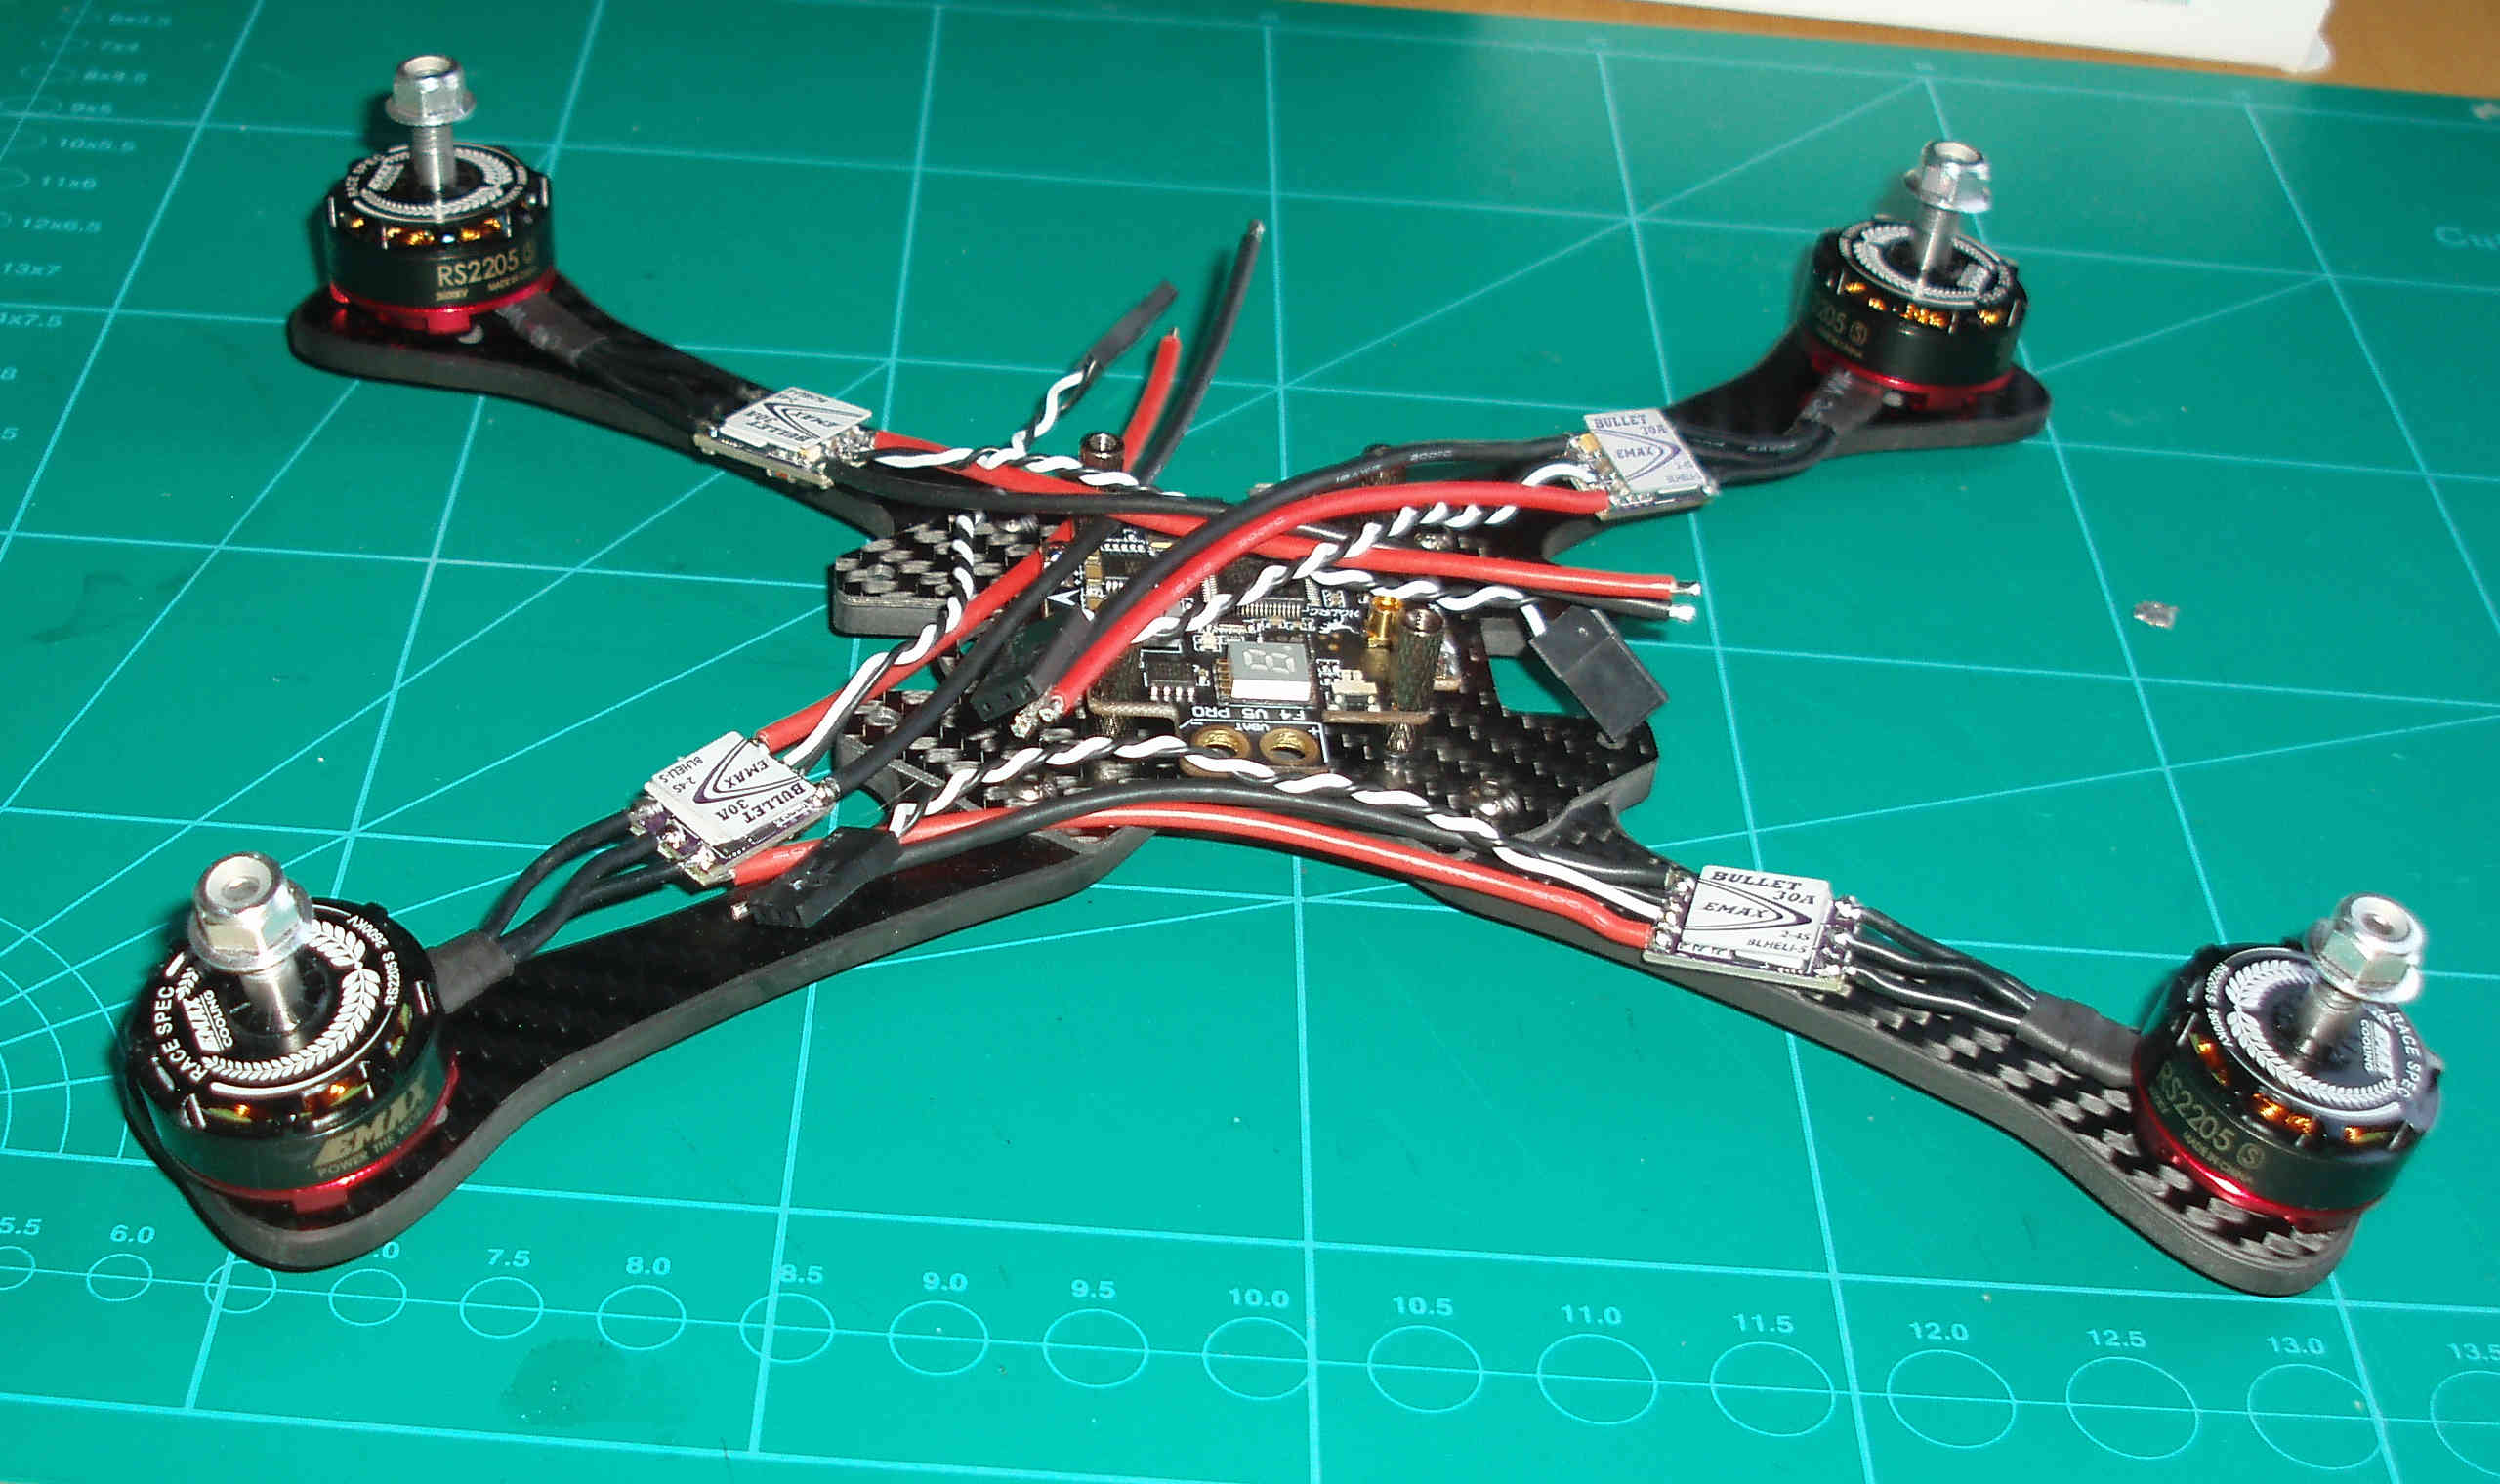 Andys awesome quad builds. Gep1111